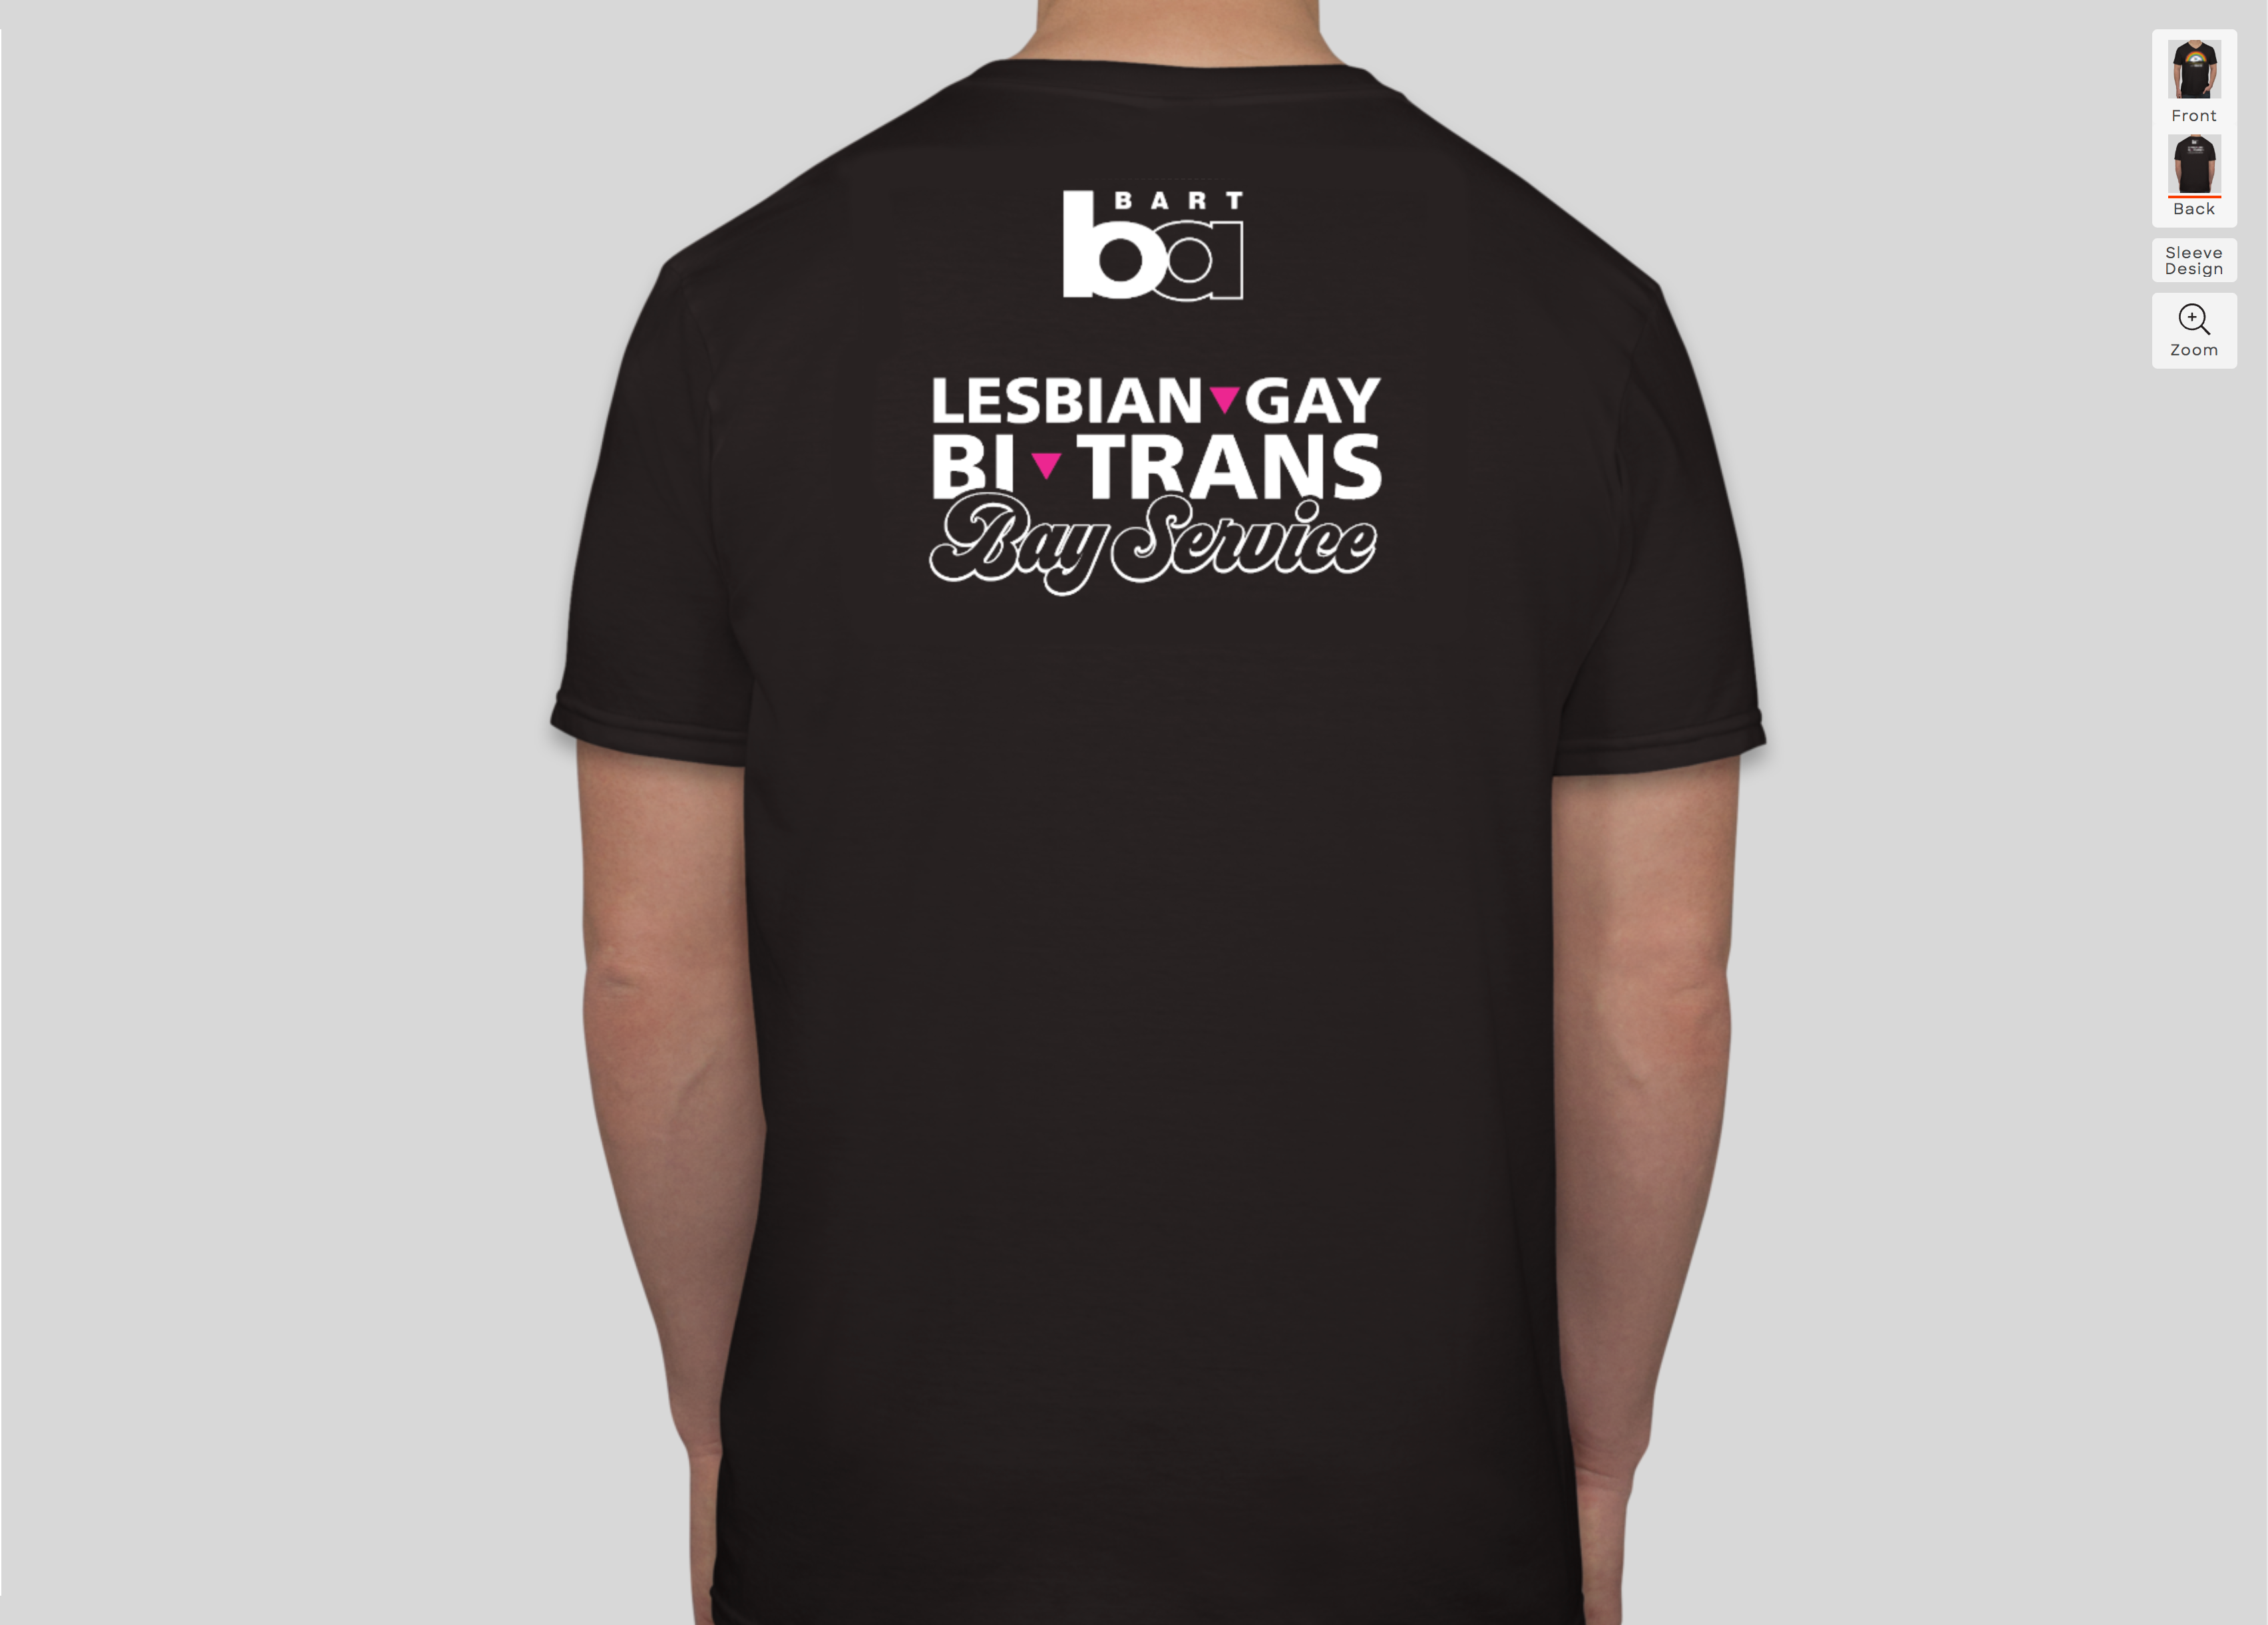 The back of the 2019 Pride shirt. 